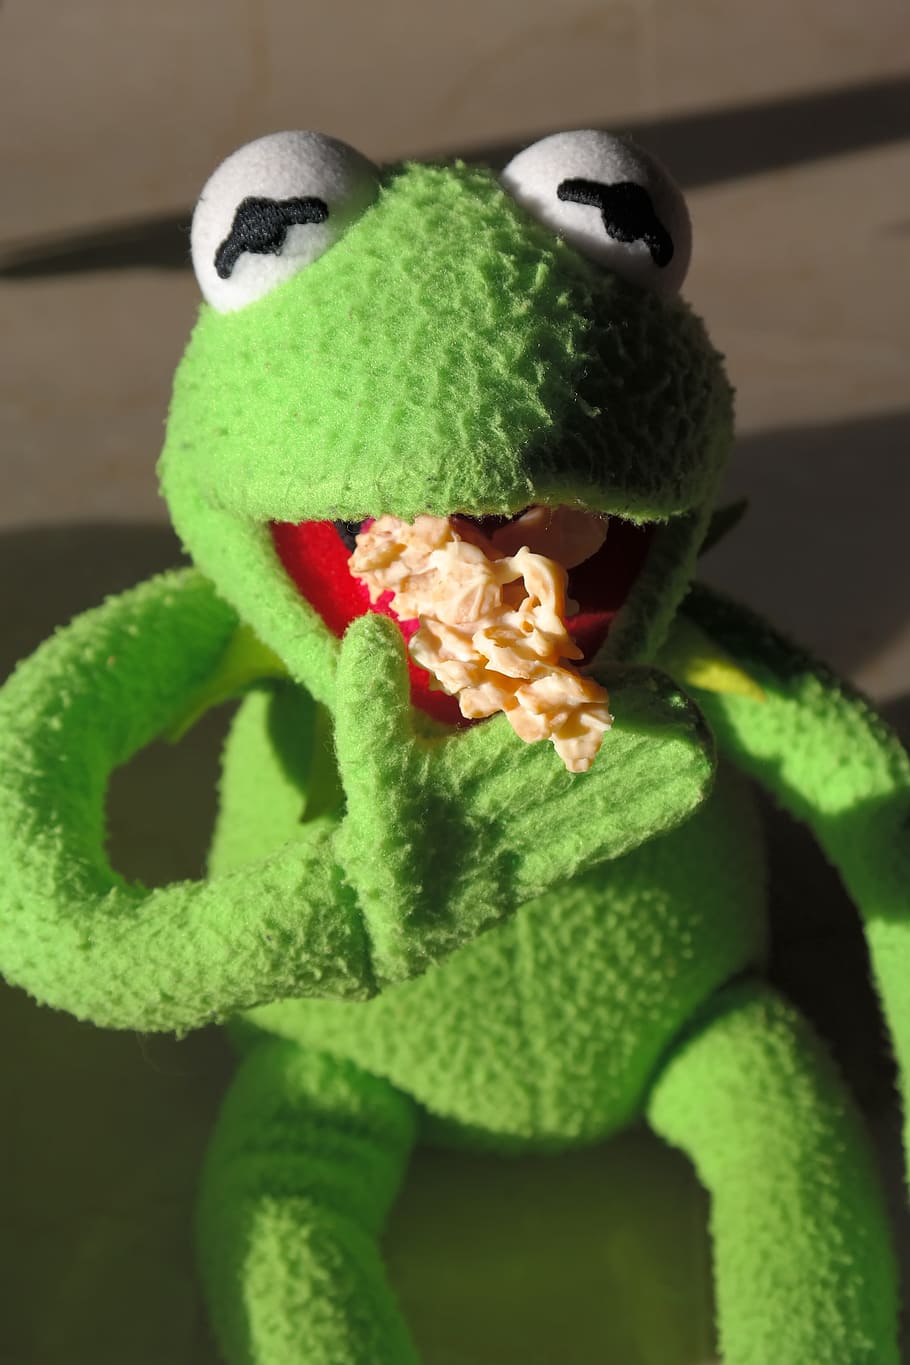 Frog, Kermit, Cookie, Nibble, Hunger, eat, small cakes, chocolate crisp happen, chocolate cornflakes cakes, chocolate cornflakes